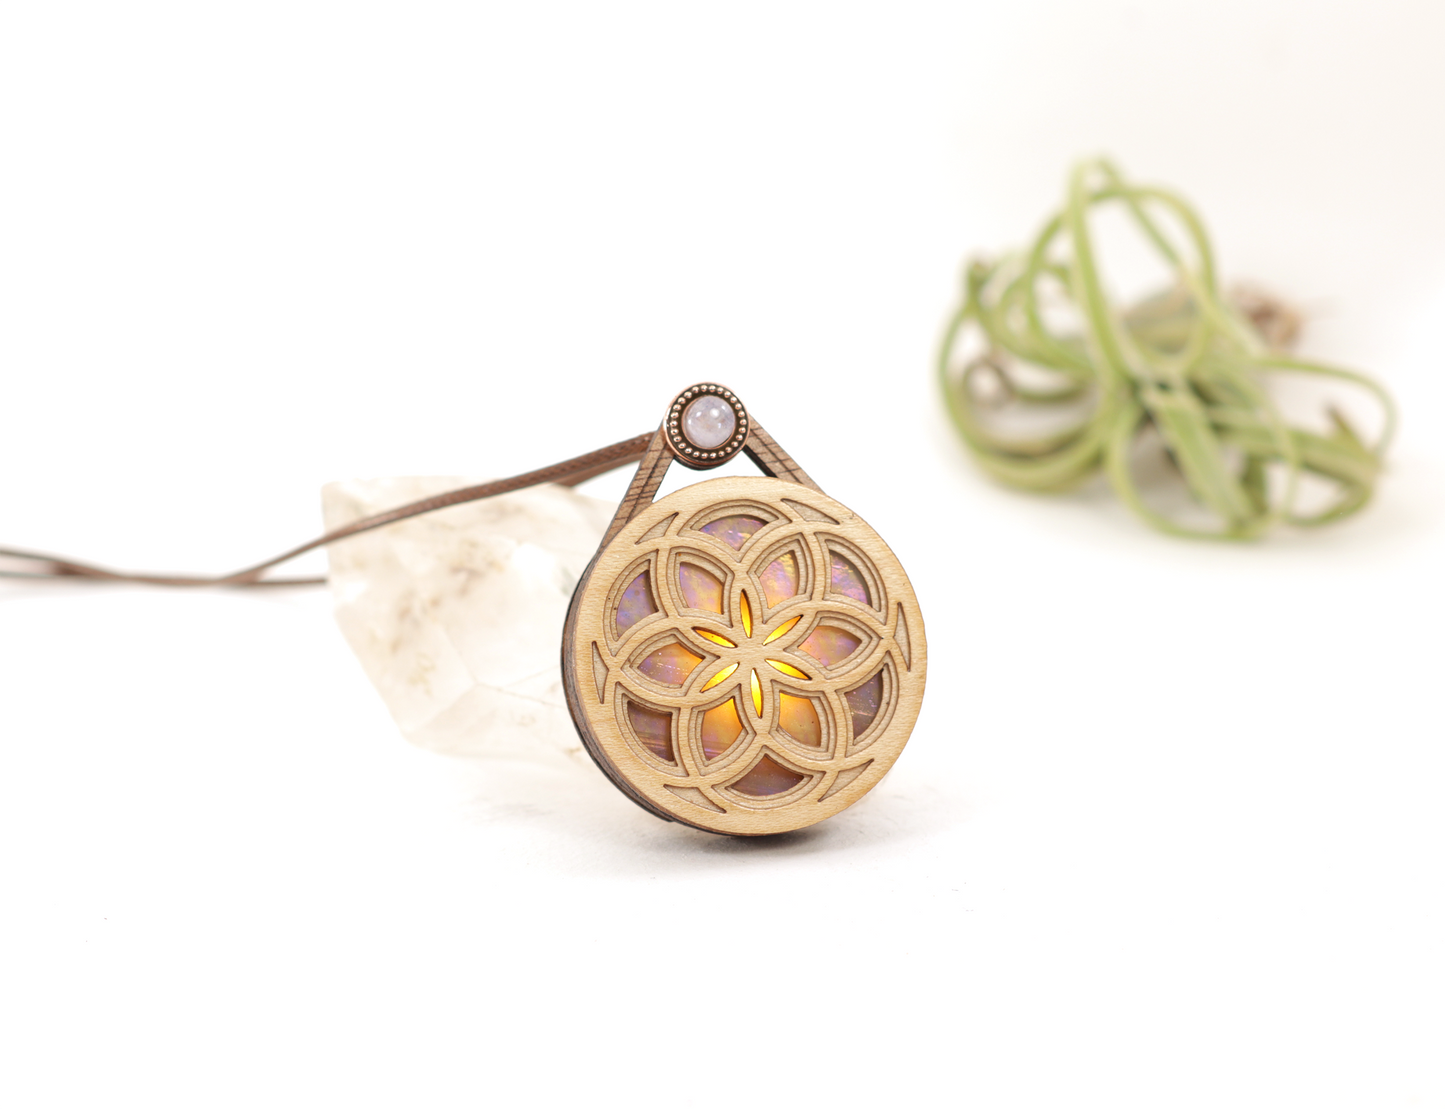 XL Multilayered Stained Glass LED Pendant in Maple | Seed Of Life